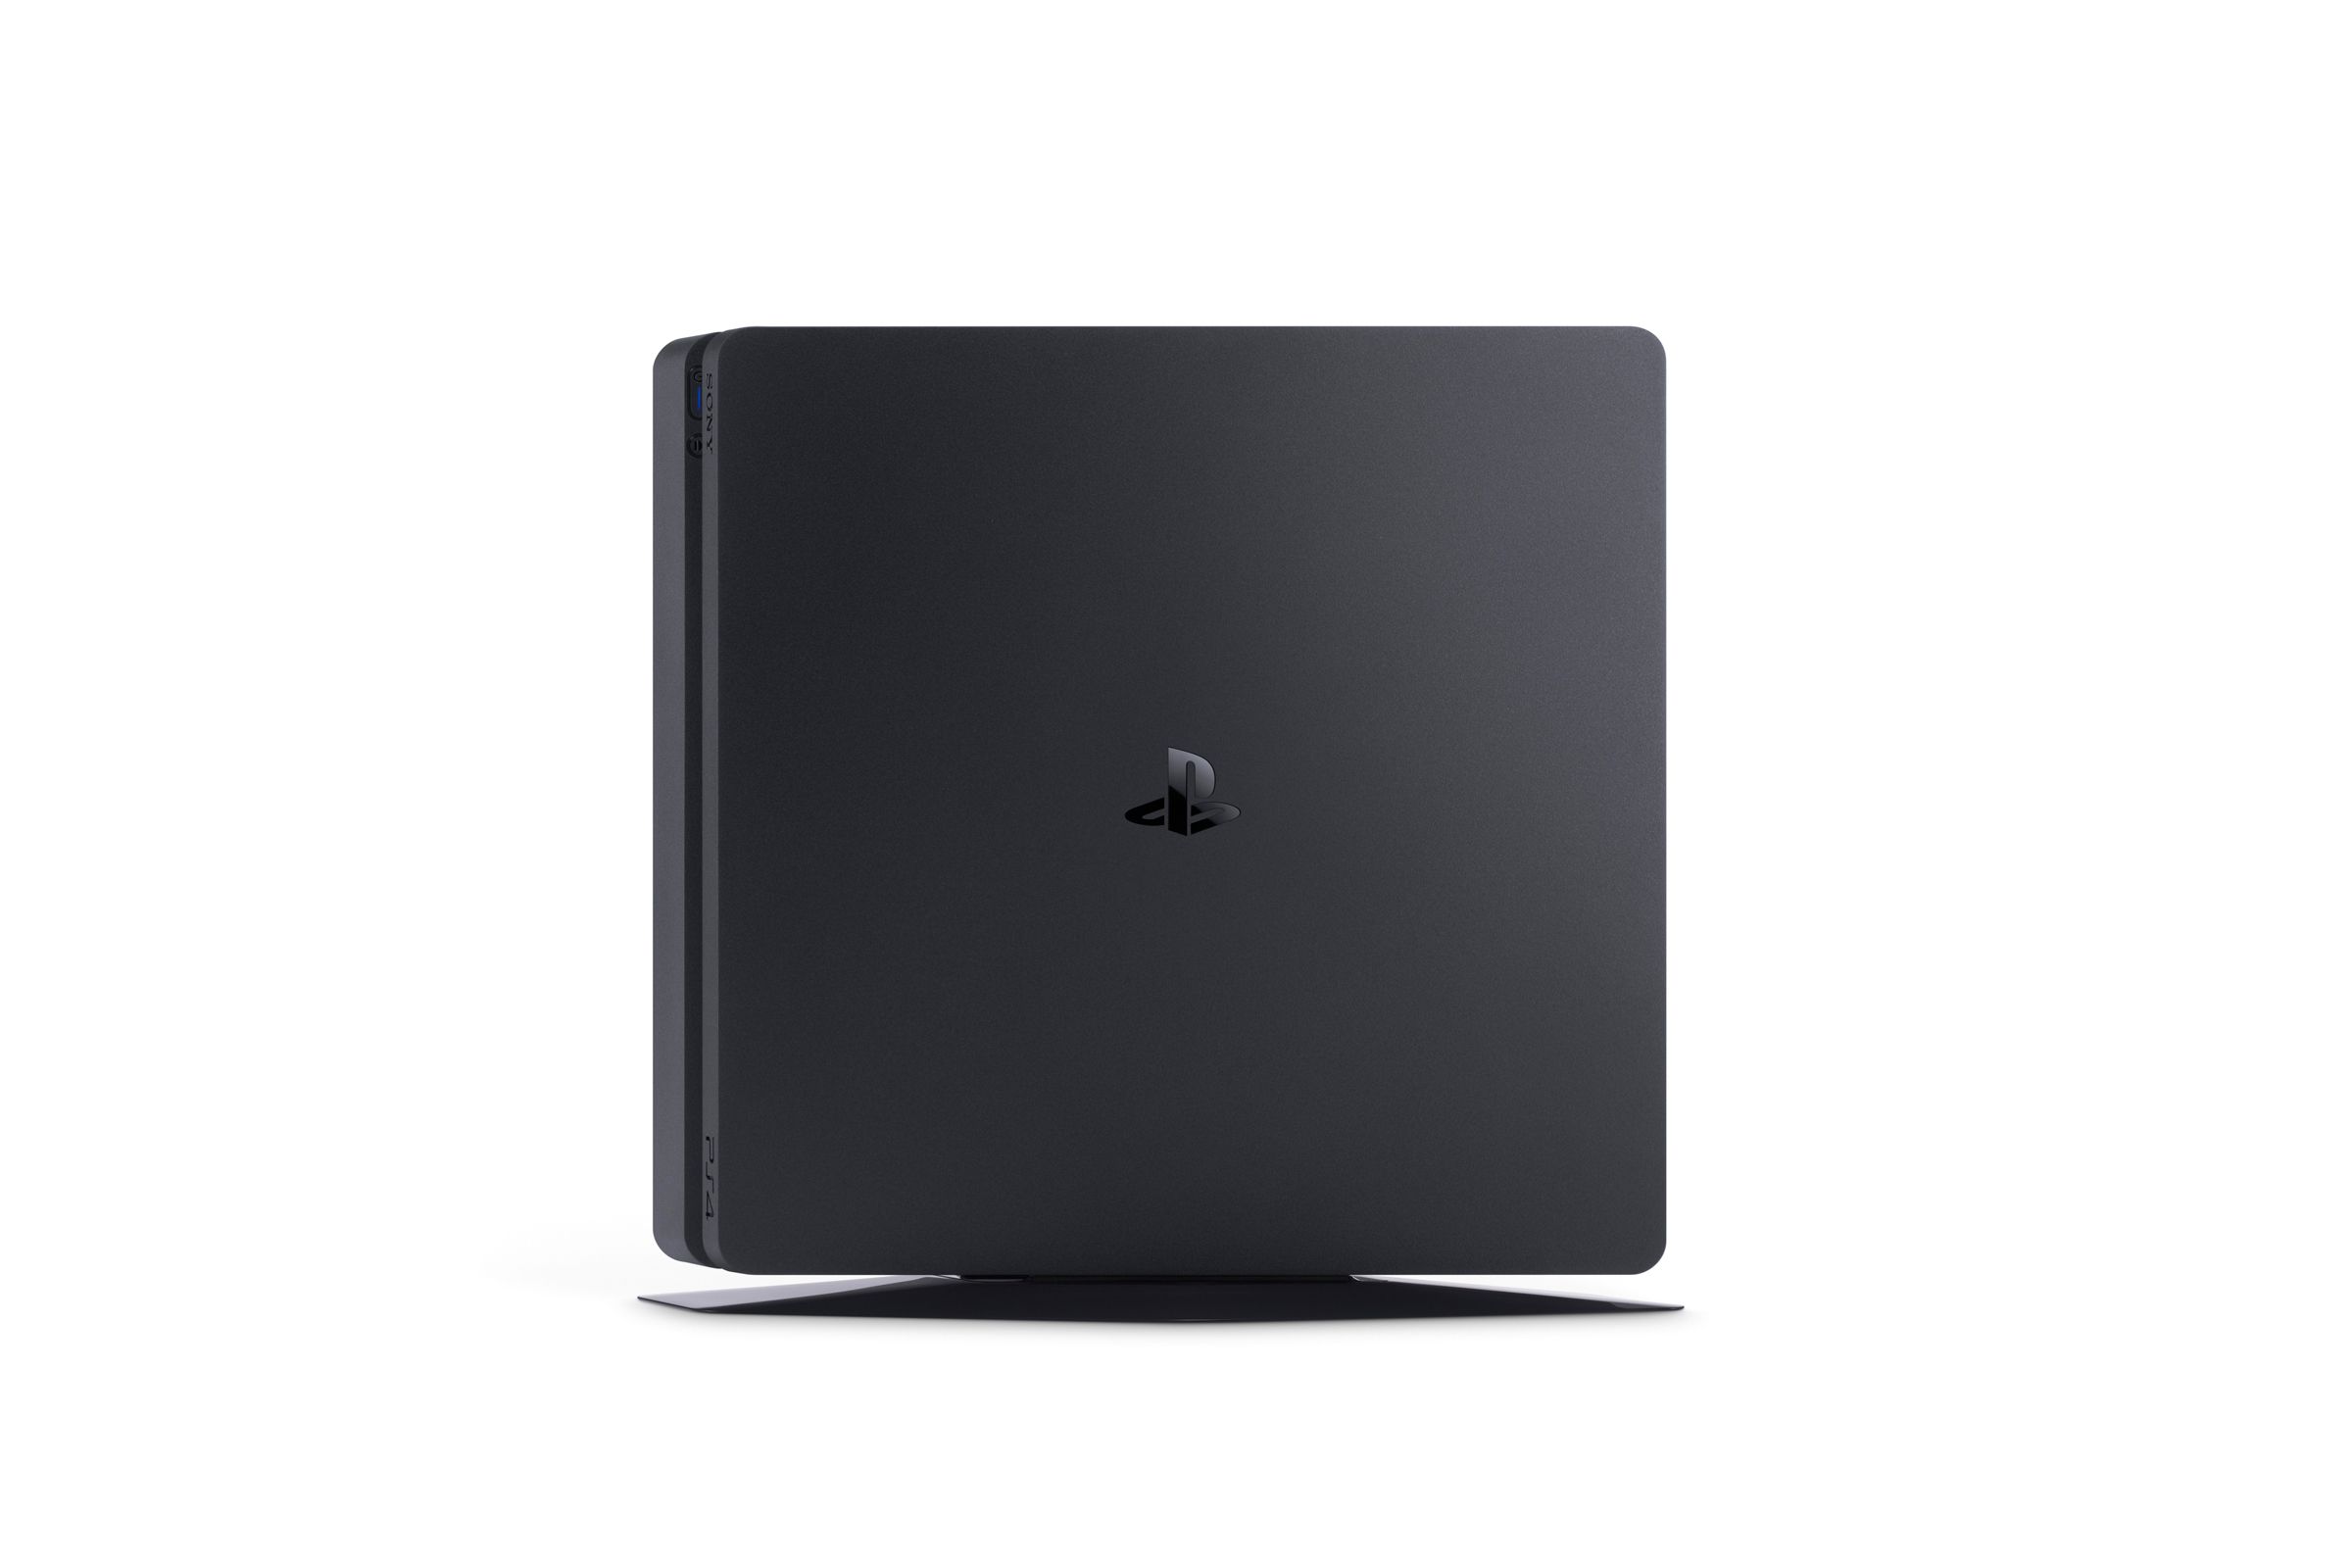 release date of ps4 slim